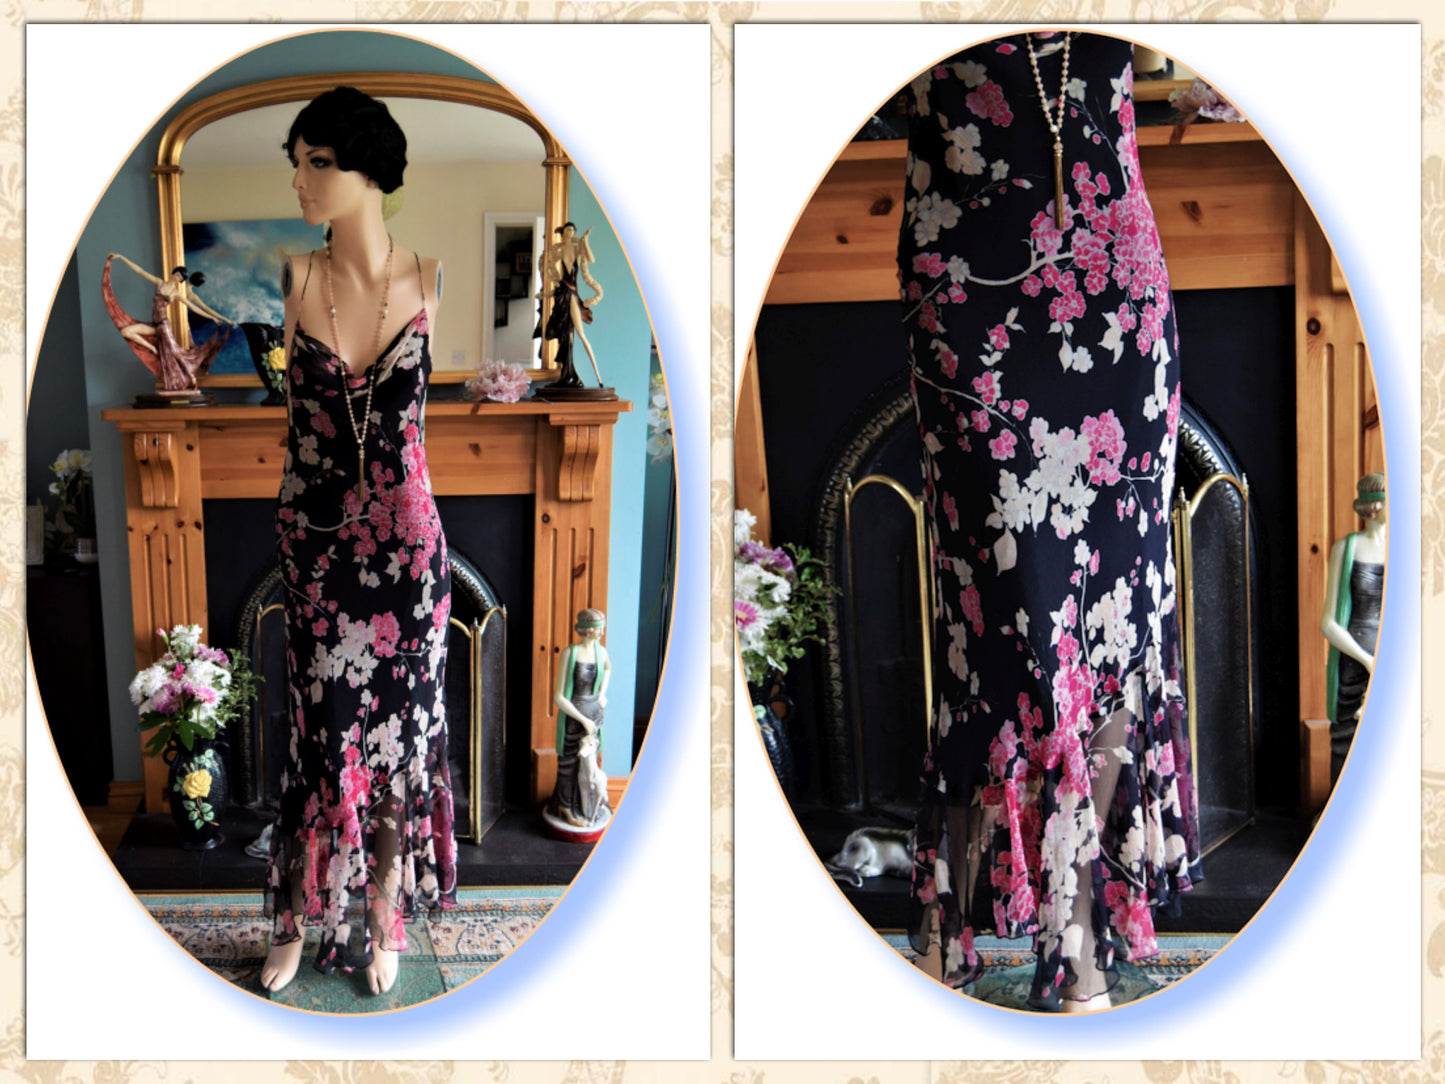 Art Deco Romantic Downton Abbey Vintage Floaty Etheral Oriental Cherry Blossom Cocktail Evening Silk Gown Size UK 12 US 8